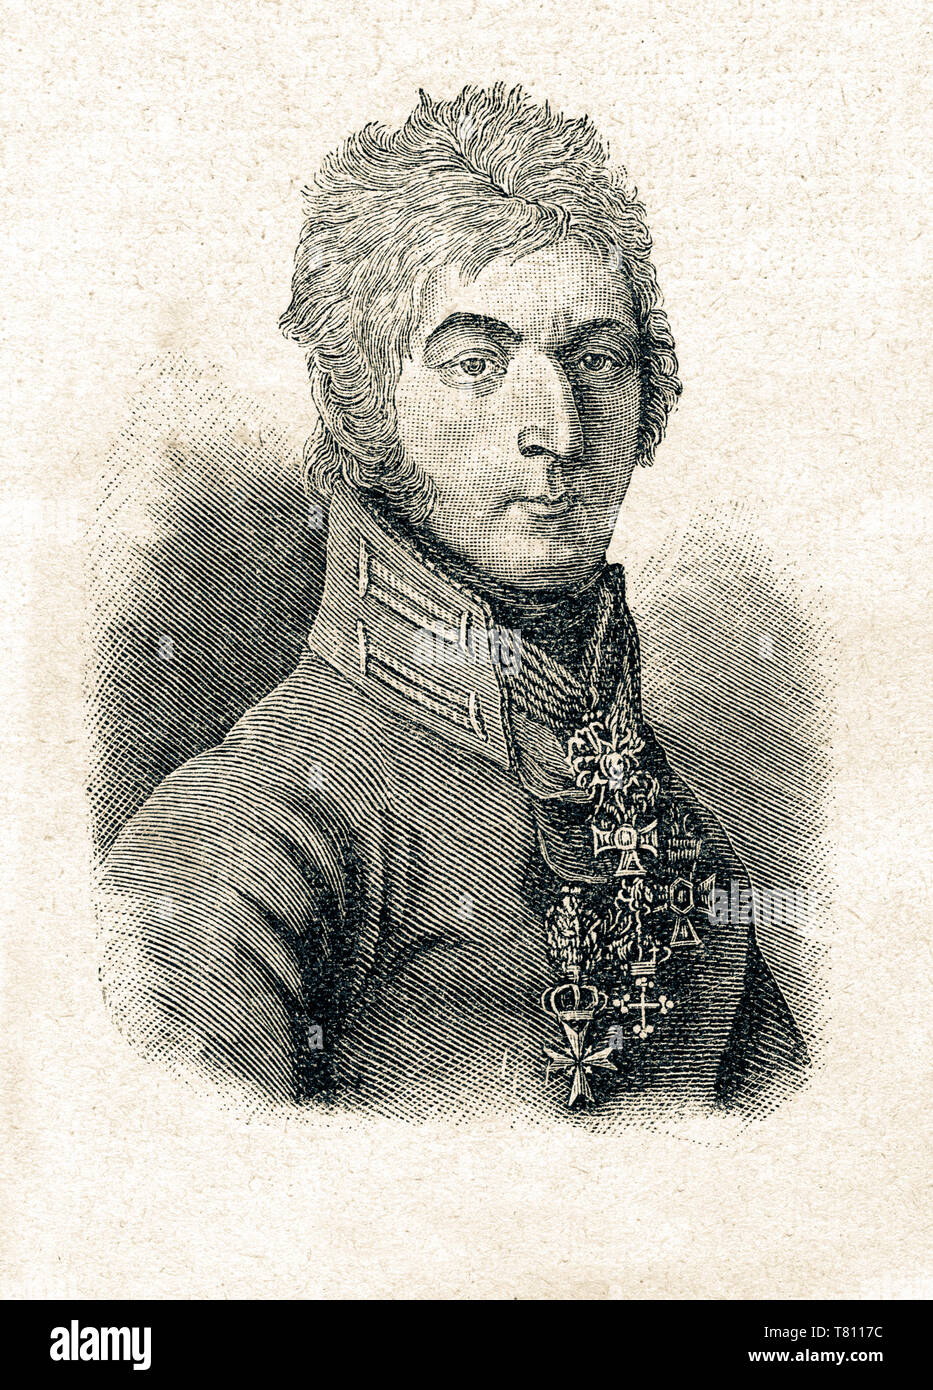 Pyotr Bagration, a Russian general and prince of Georgianorigin, prominent during the Napoleonic Wars/1812/. Digital improved reproduction from Illustrated overview of the life of mankind in the 19th century, 1901 edition, Marx publishing house, St. Petersburg Stock Photo